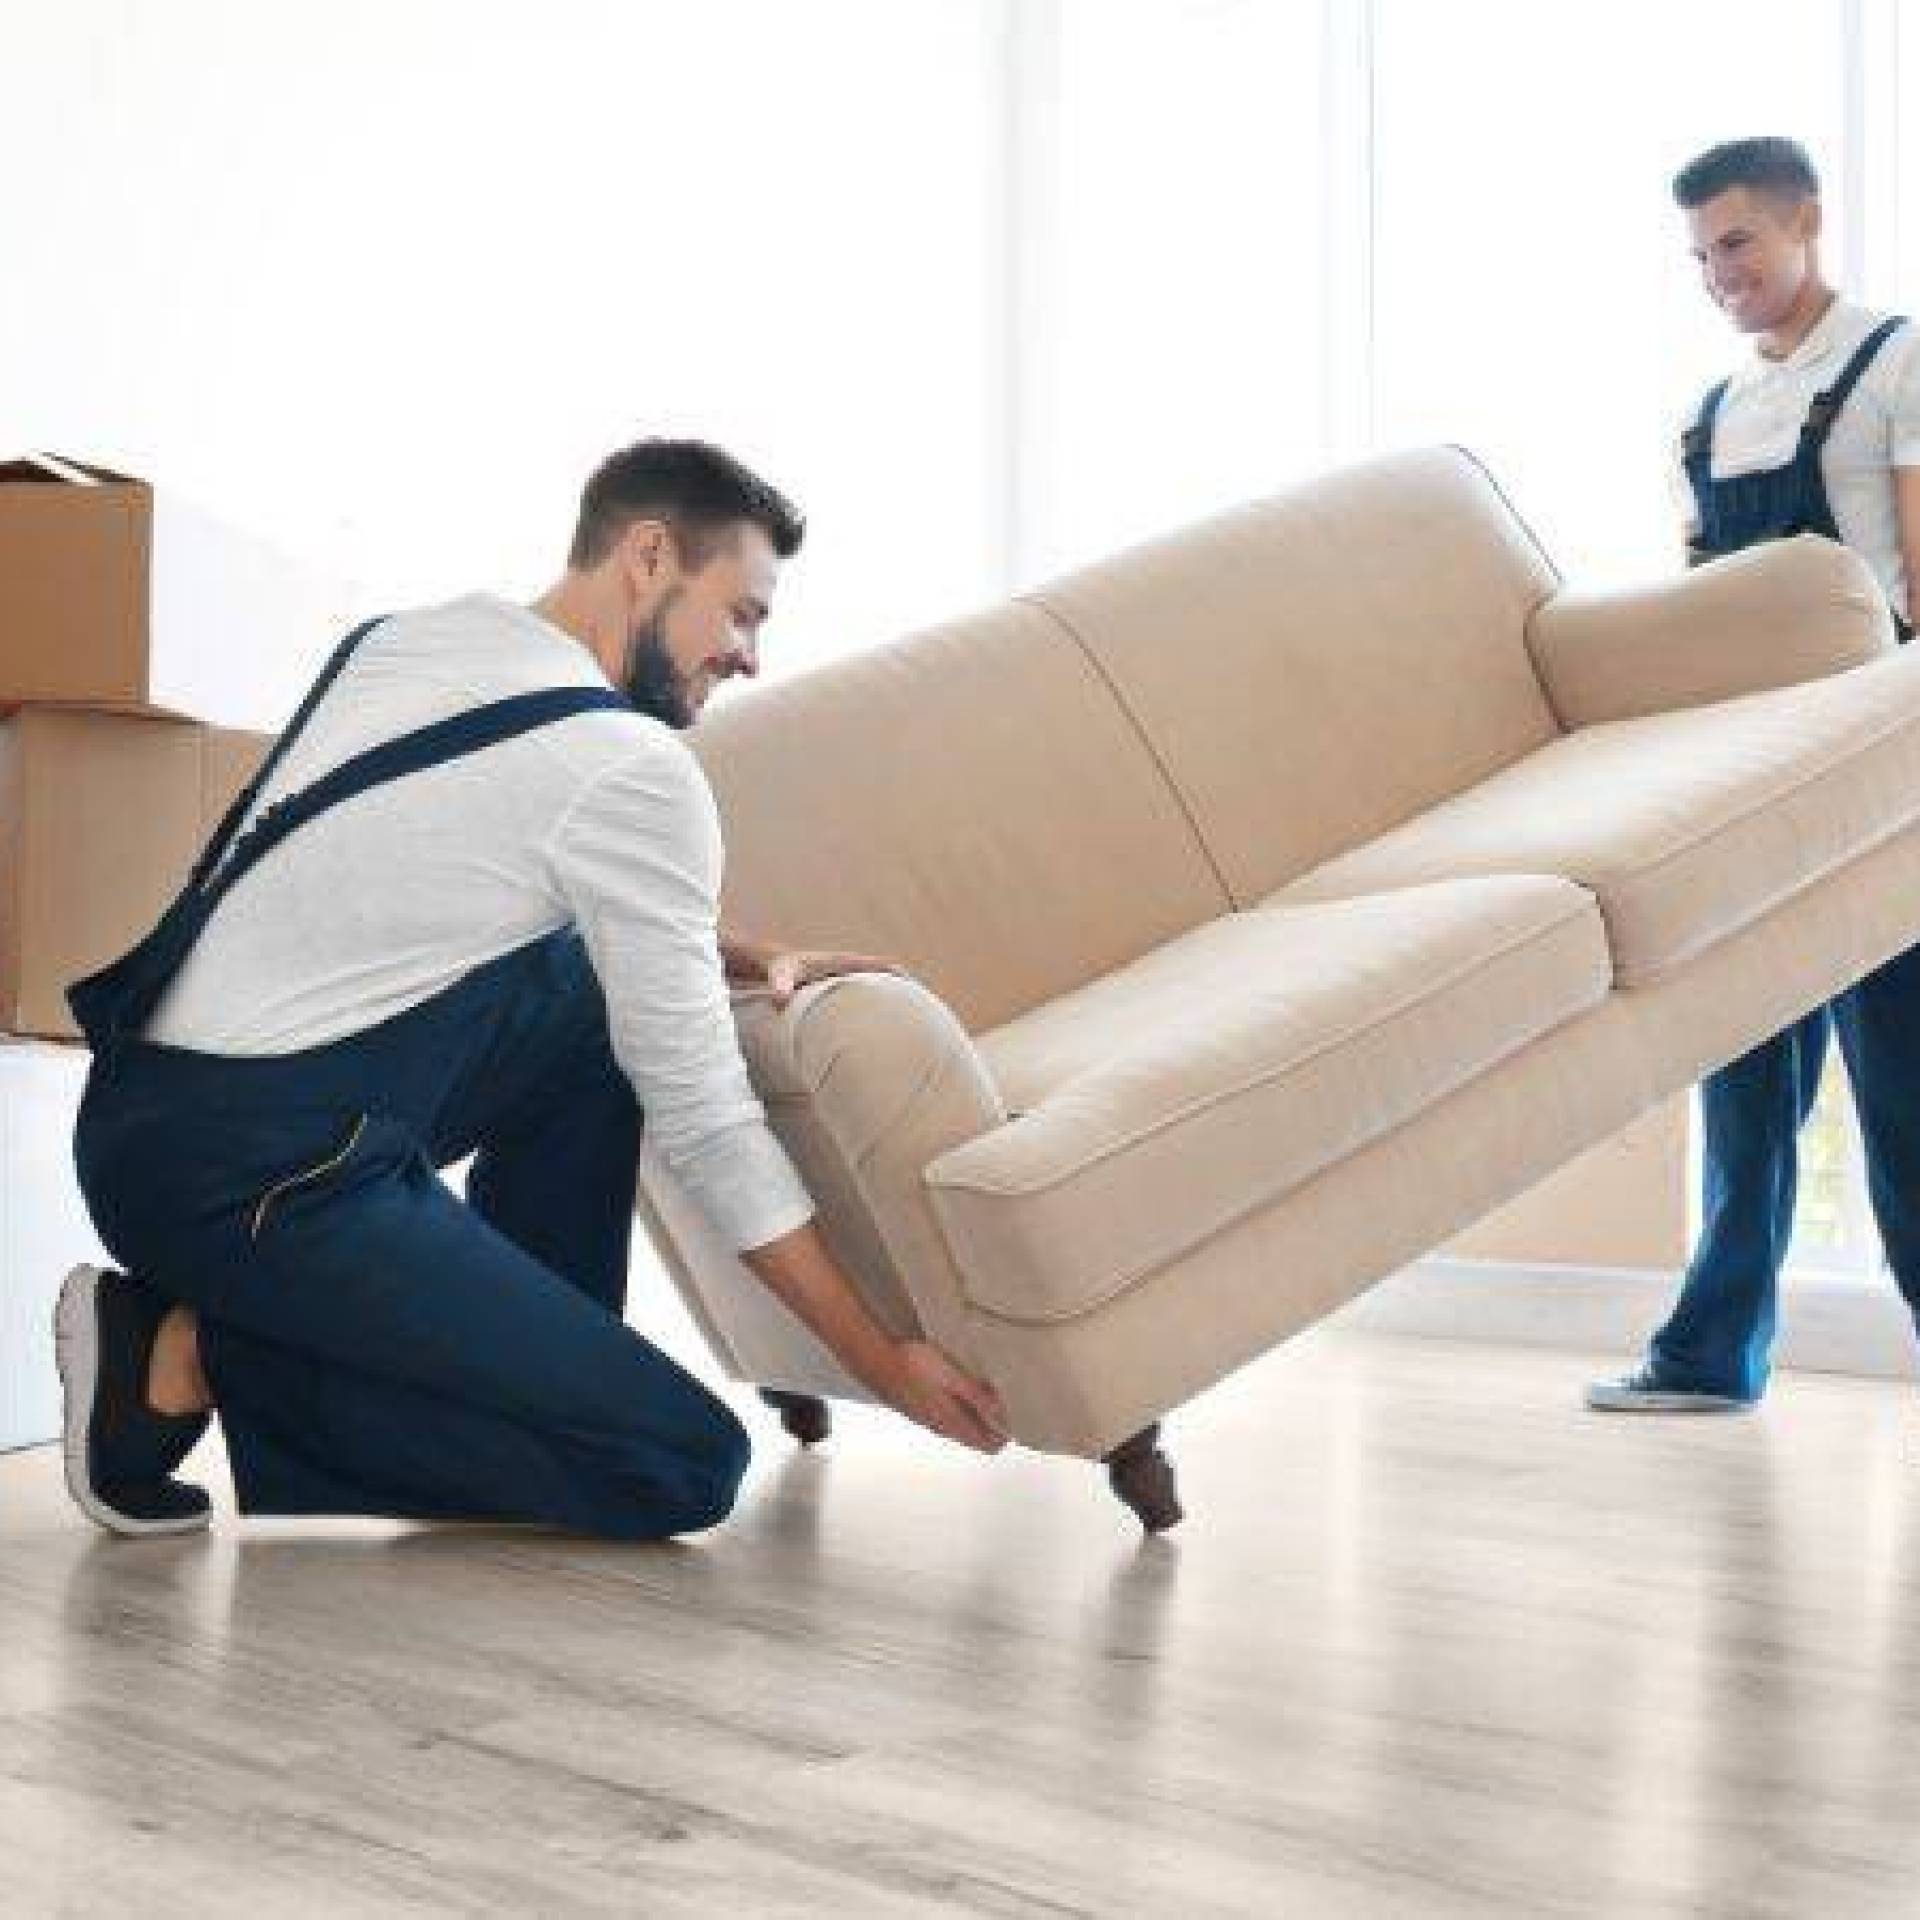 Unmatched House Clearance Expertise: A Step Above the Rest